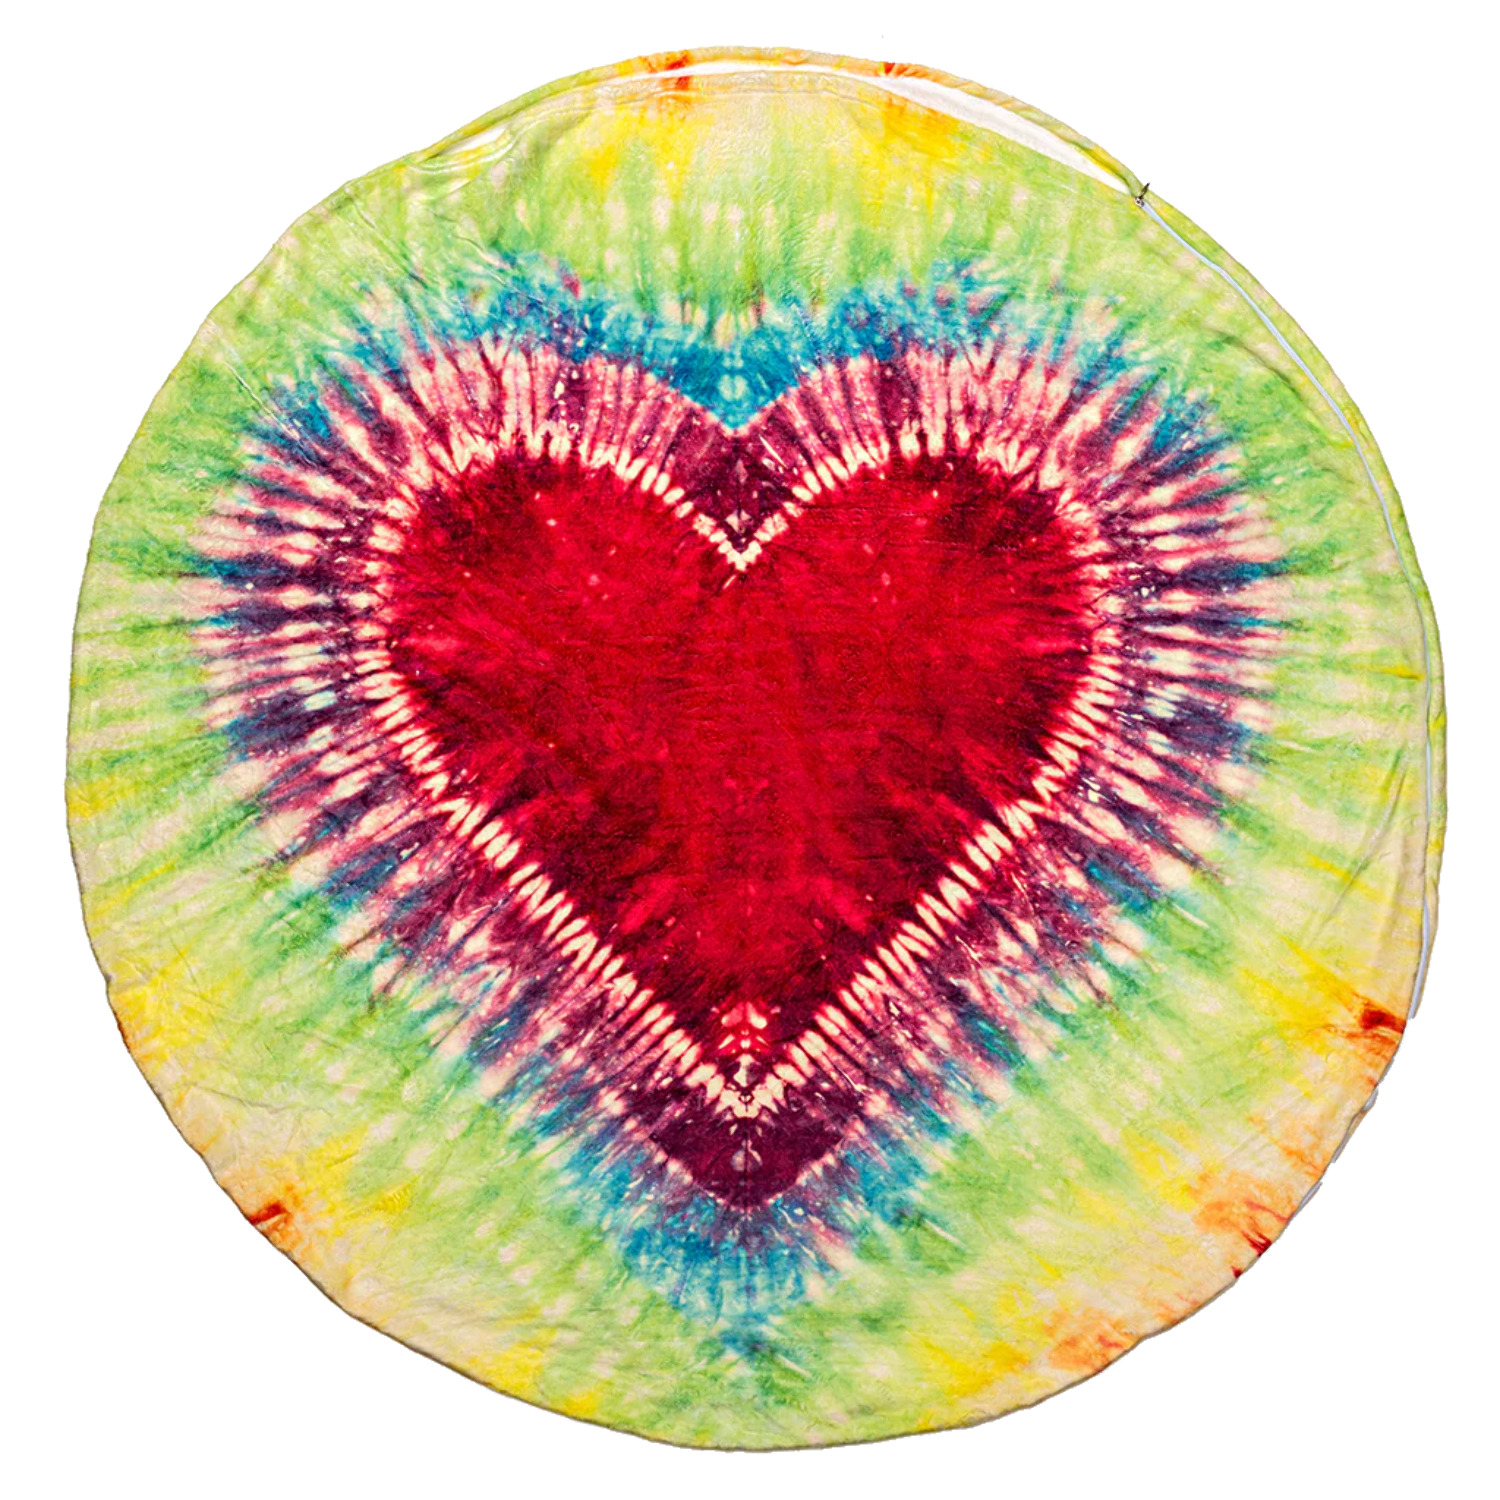 Heart Tie Dye Round Sleeping Bag Blanket 60" Diameter - Cozy Warm Flannel - Novelty Circle Throw Blanket Unique & Fun Love Blanket - Perfect for Kids, Perfect for Birthday Gift - image 4 of 5